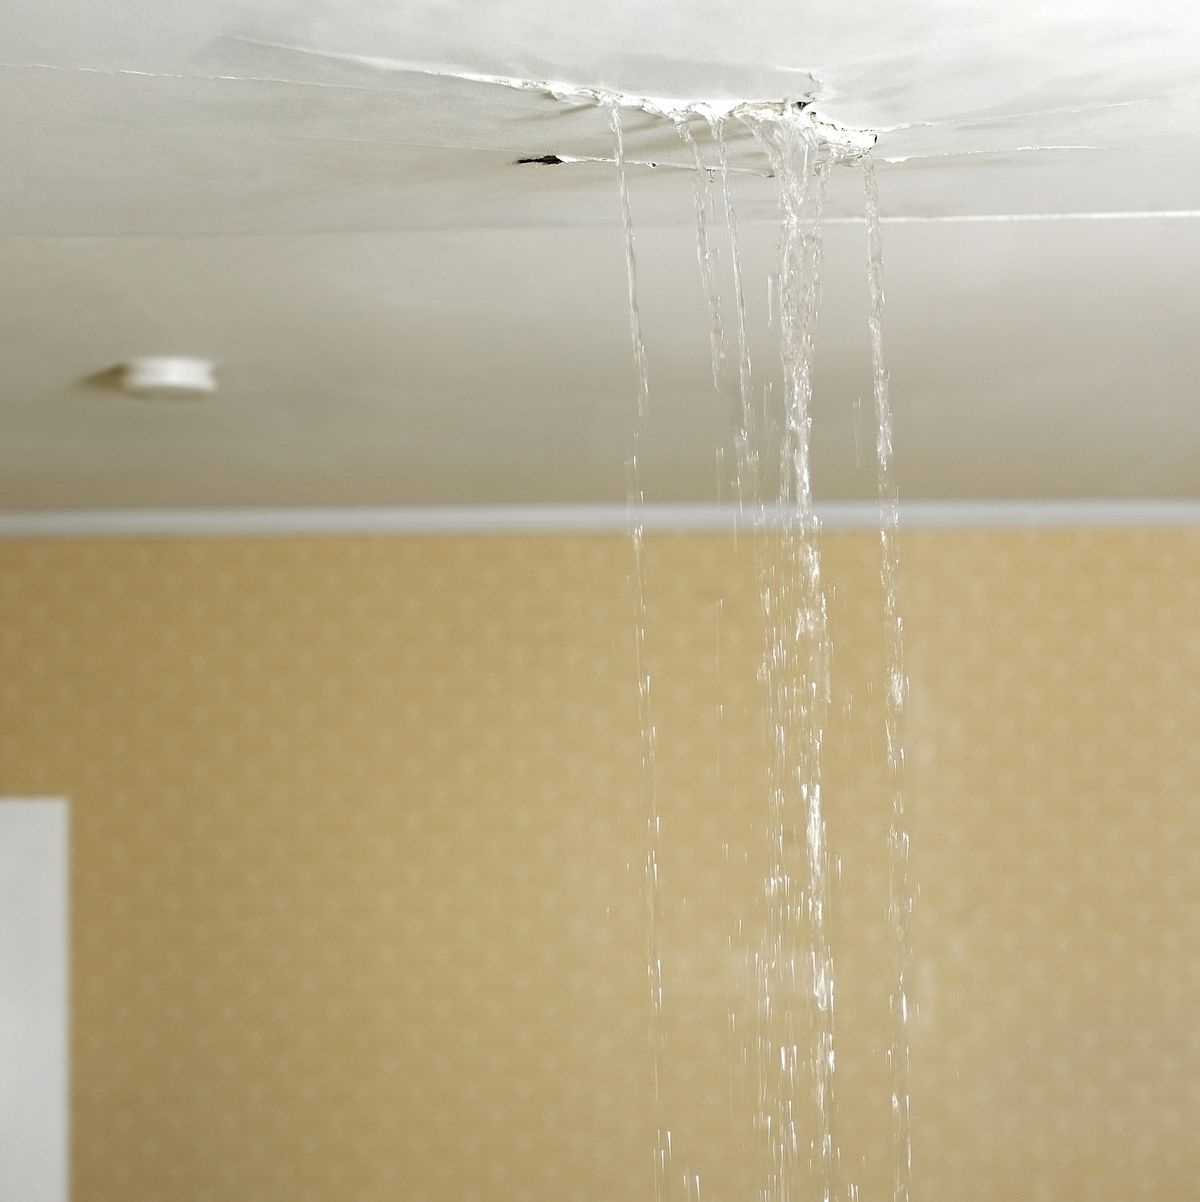 What To Do When Ceiling Is Leaking